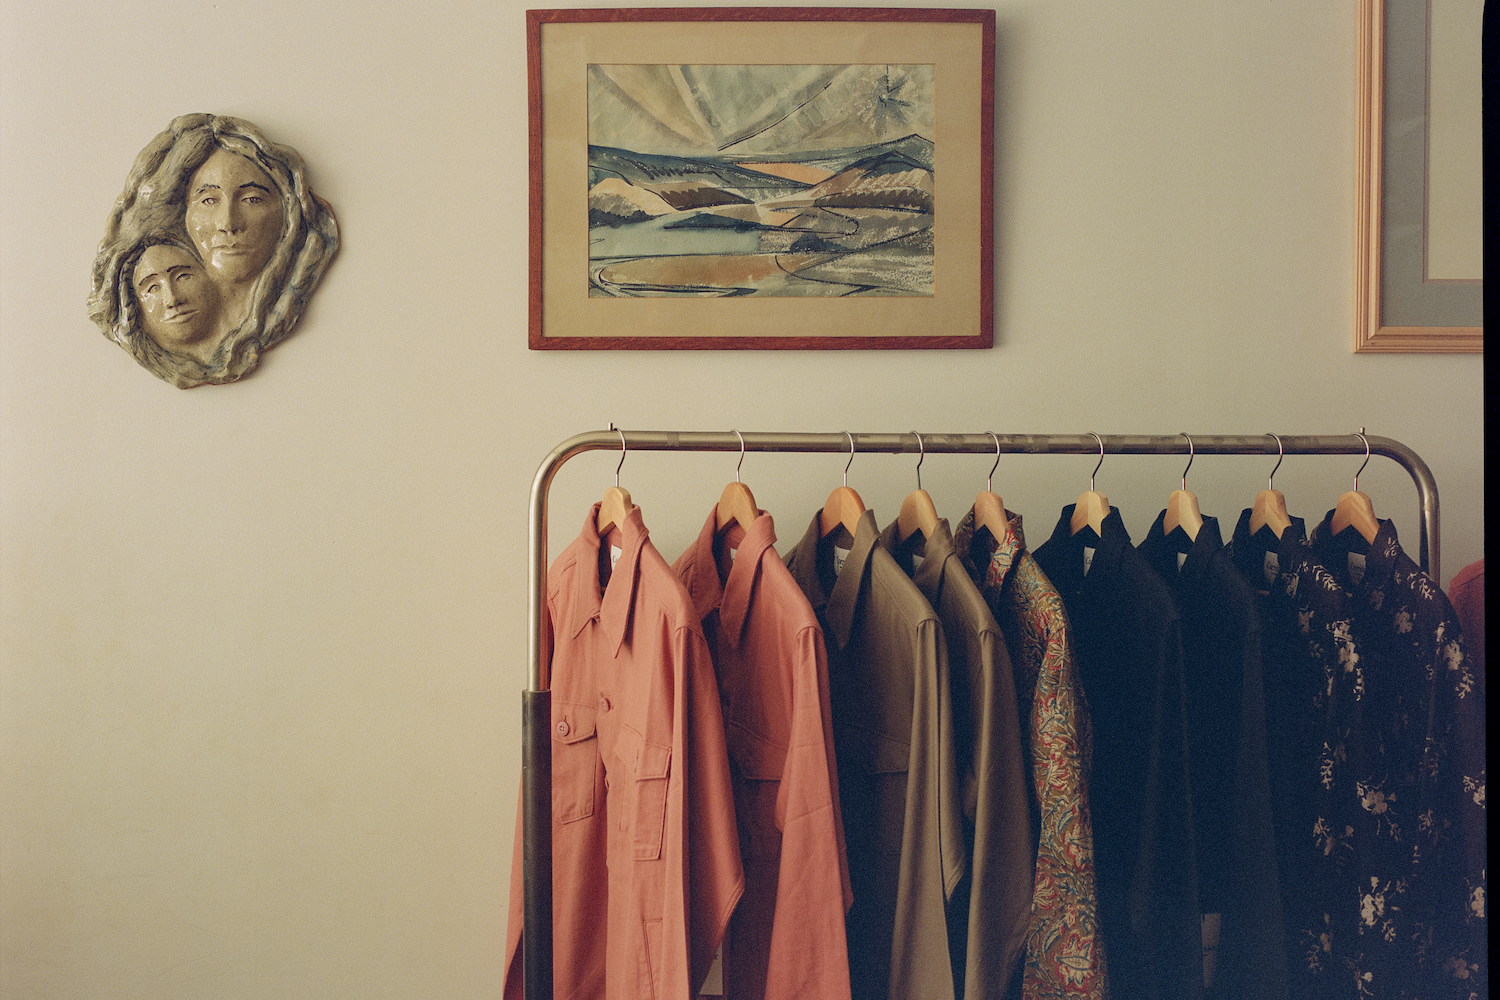 multicolored garments hanging on a rack, painting of mountains on wall, sculpture of faces on wall